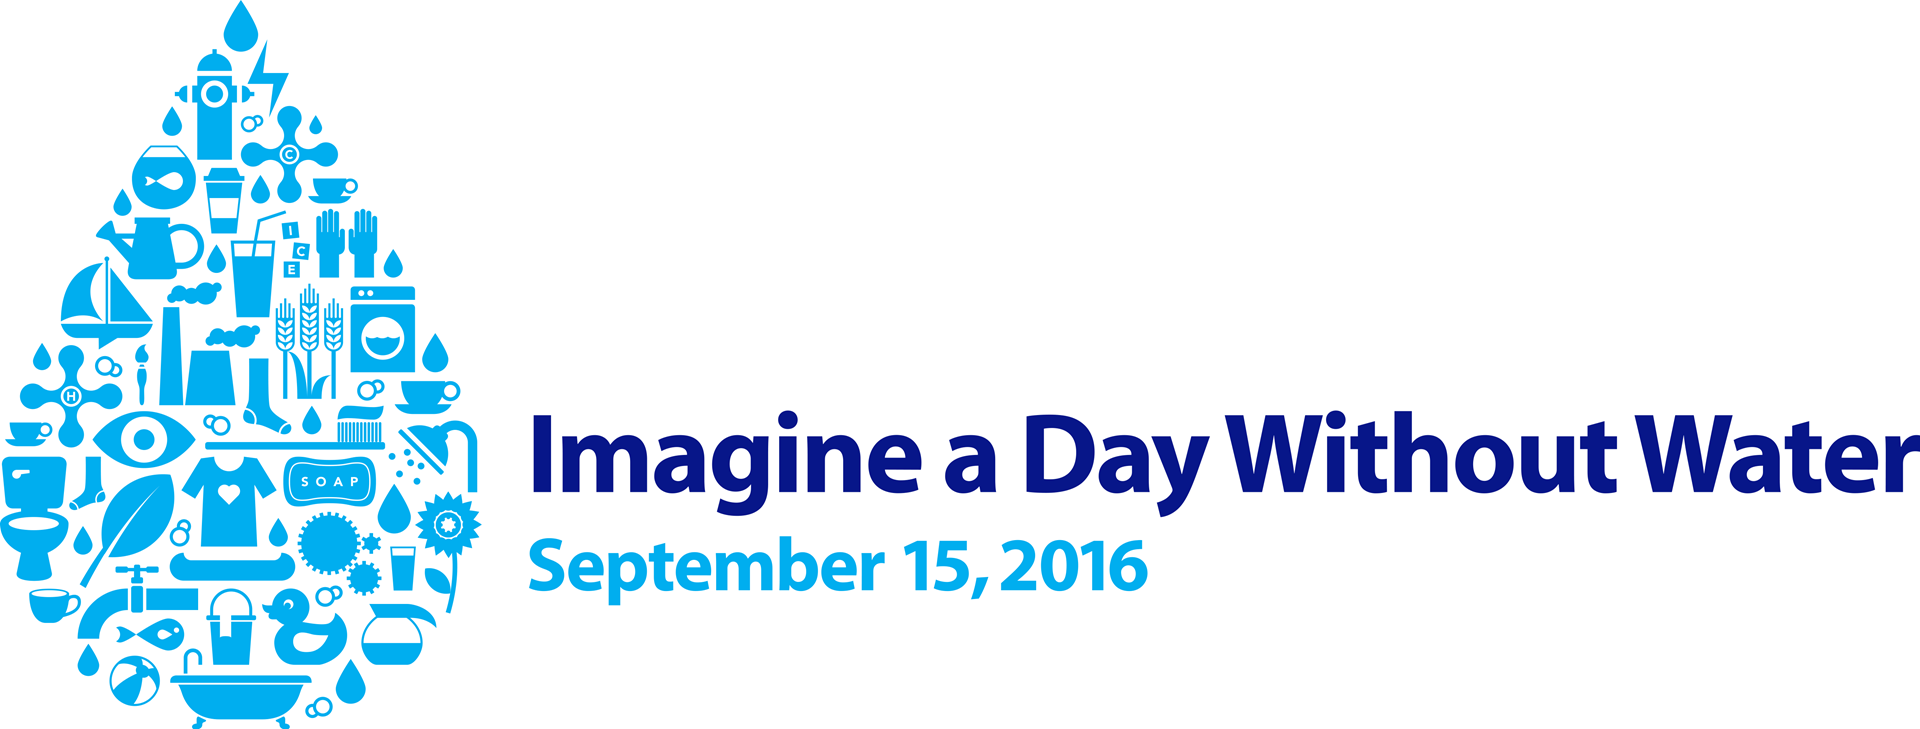 Audubon International Joins National “Imagine a Day Without Water